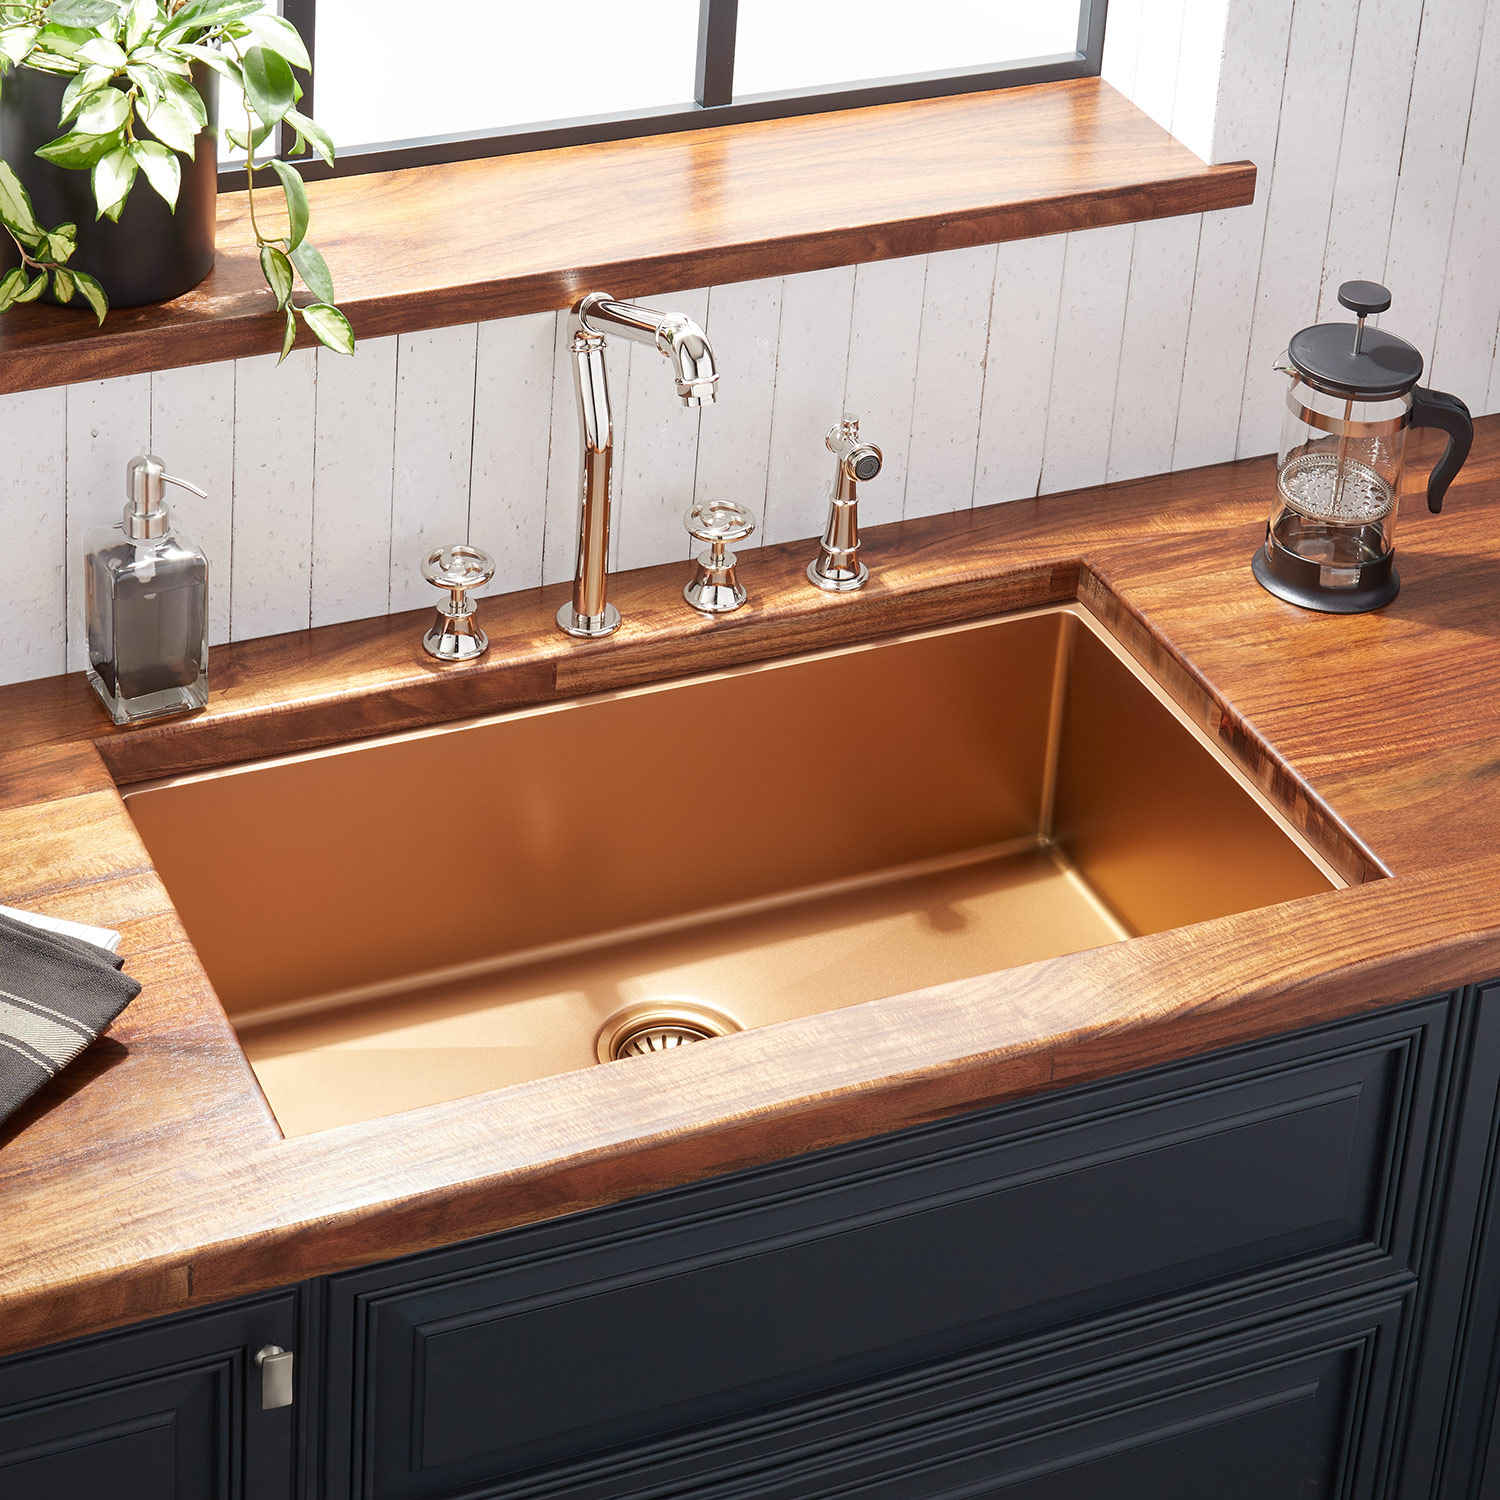 Modern Kitchen Sink Designs and Ideas 2020 - Fine Art and You